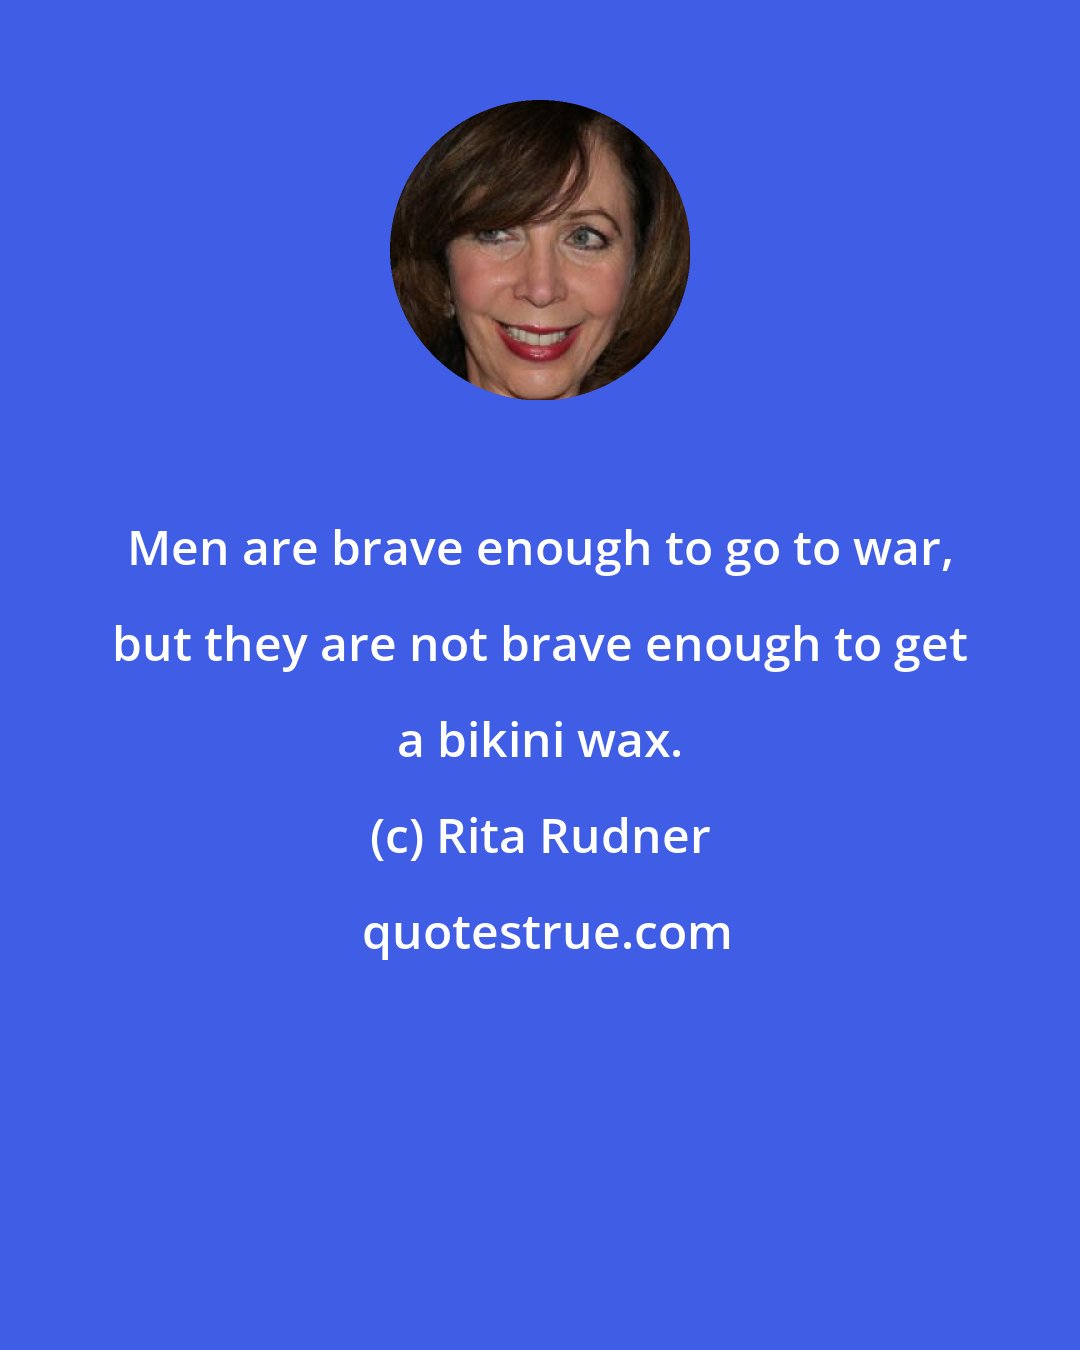 Rita Rudner: Men are brave enough to go to war, but they are not brave enough to get a bikini wax.